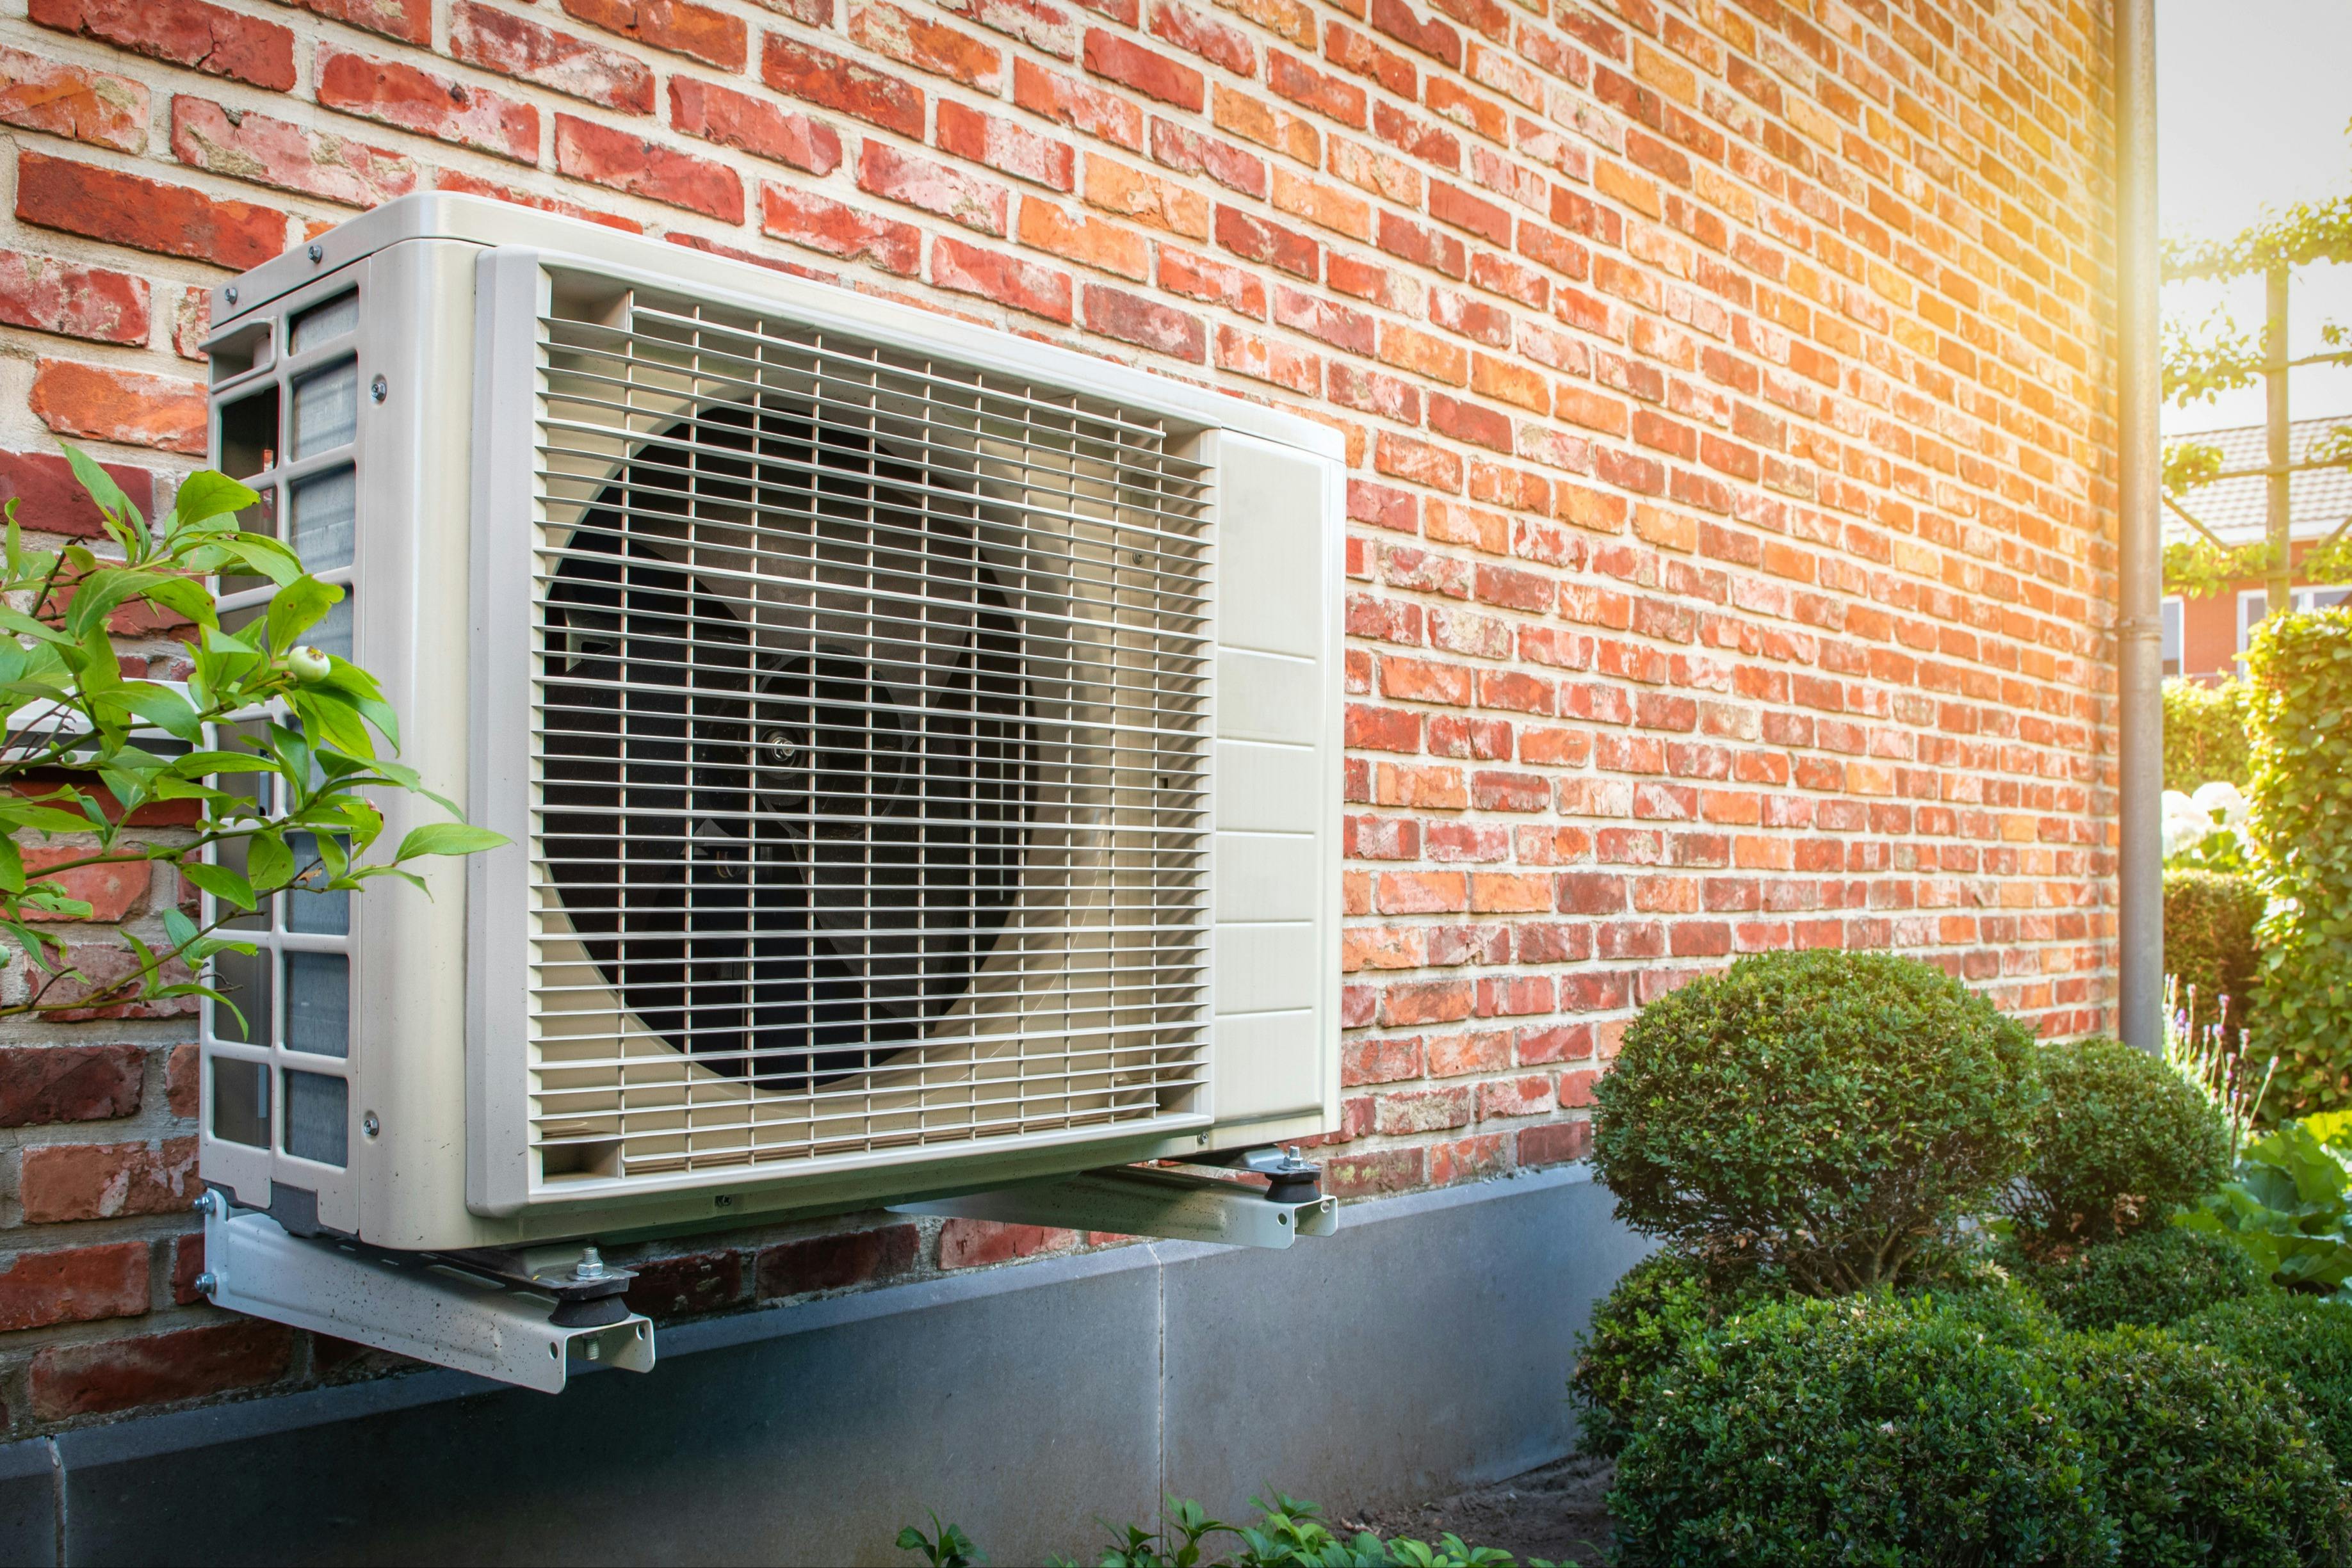 Do You Need Commercial Heat Pumps for Your Business?